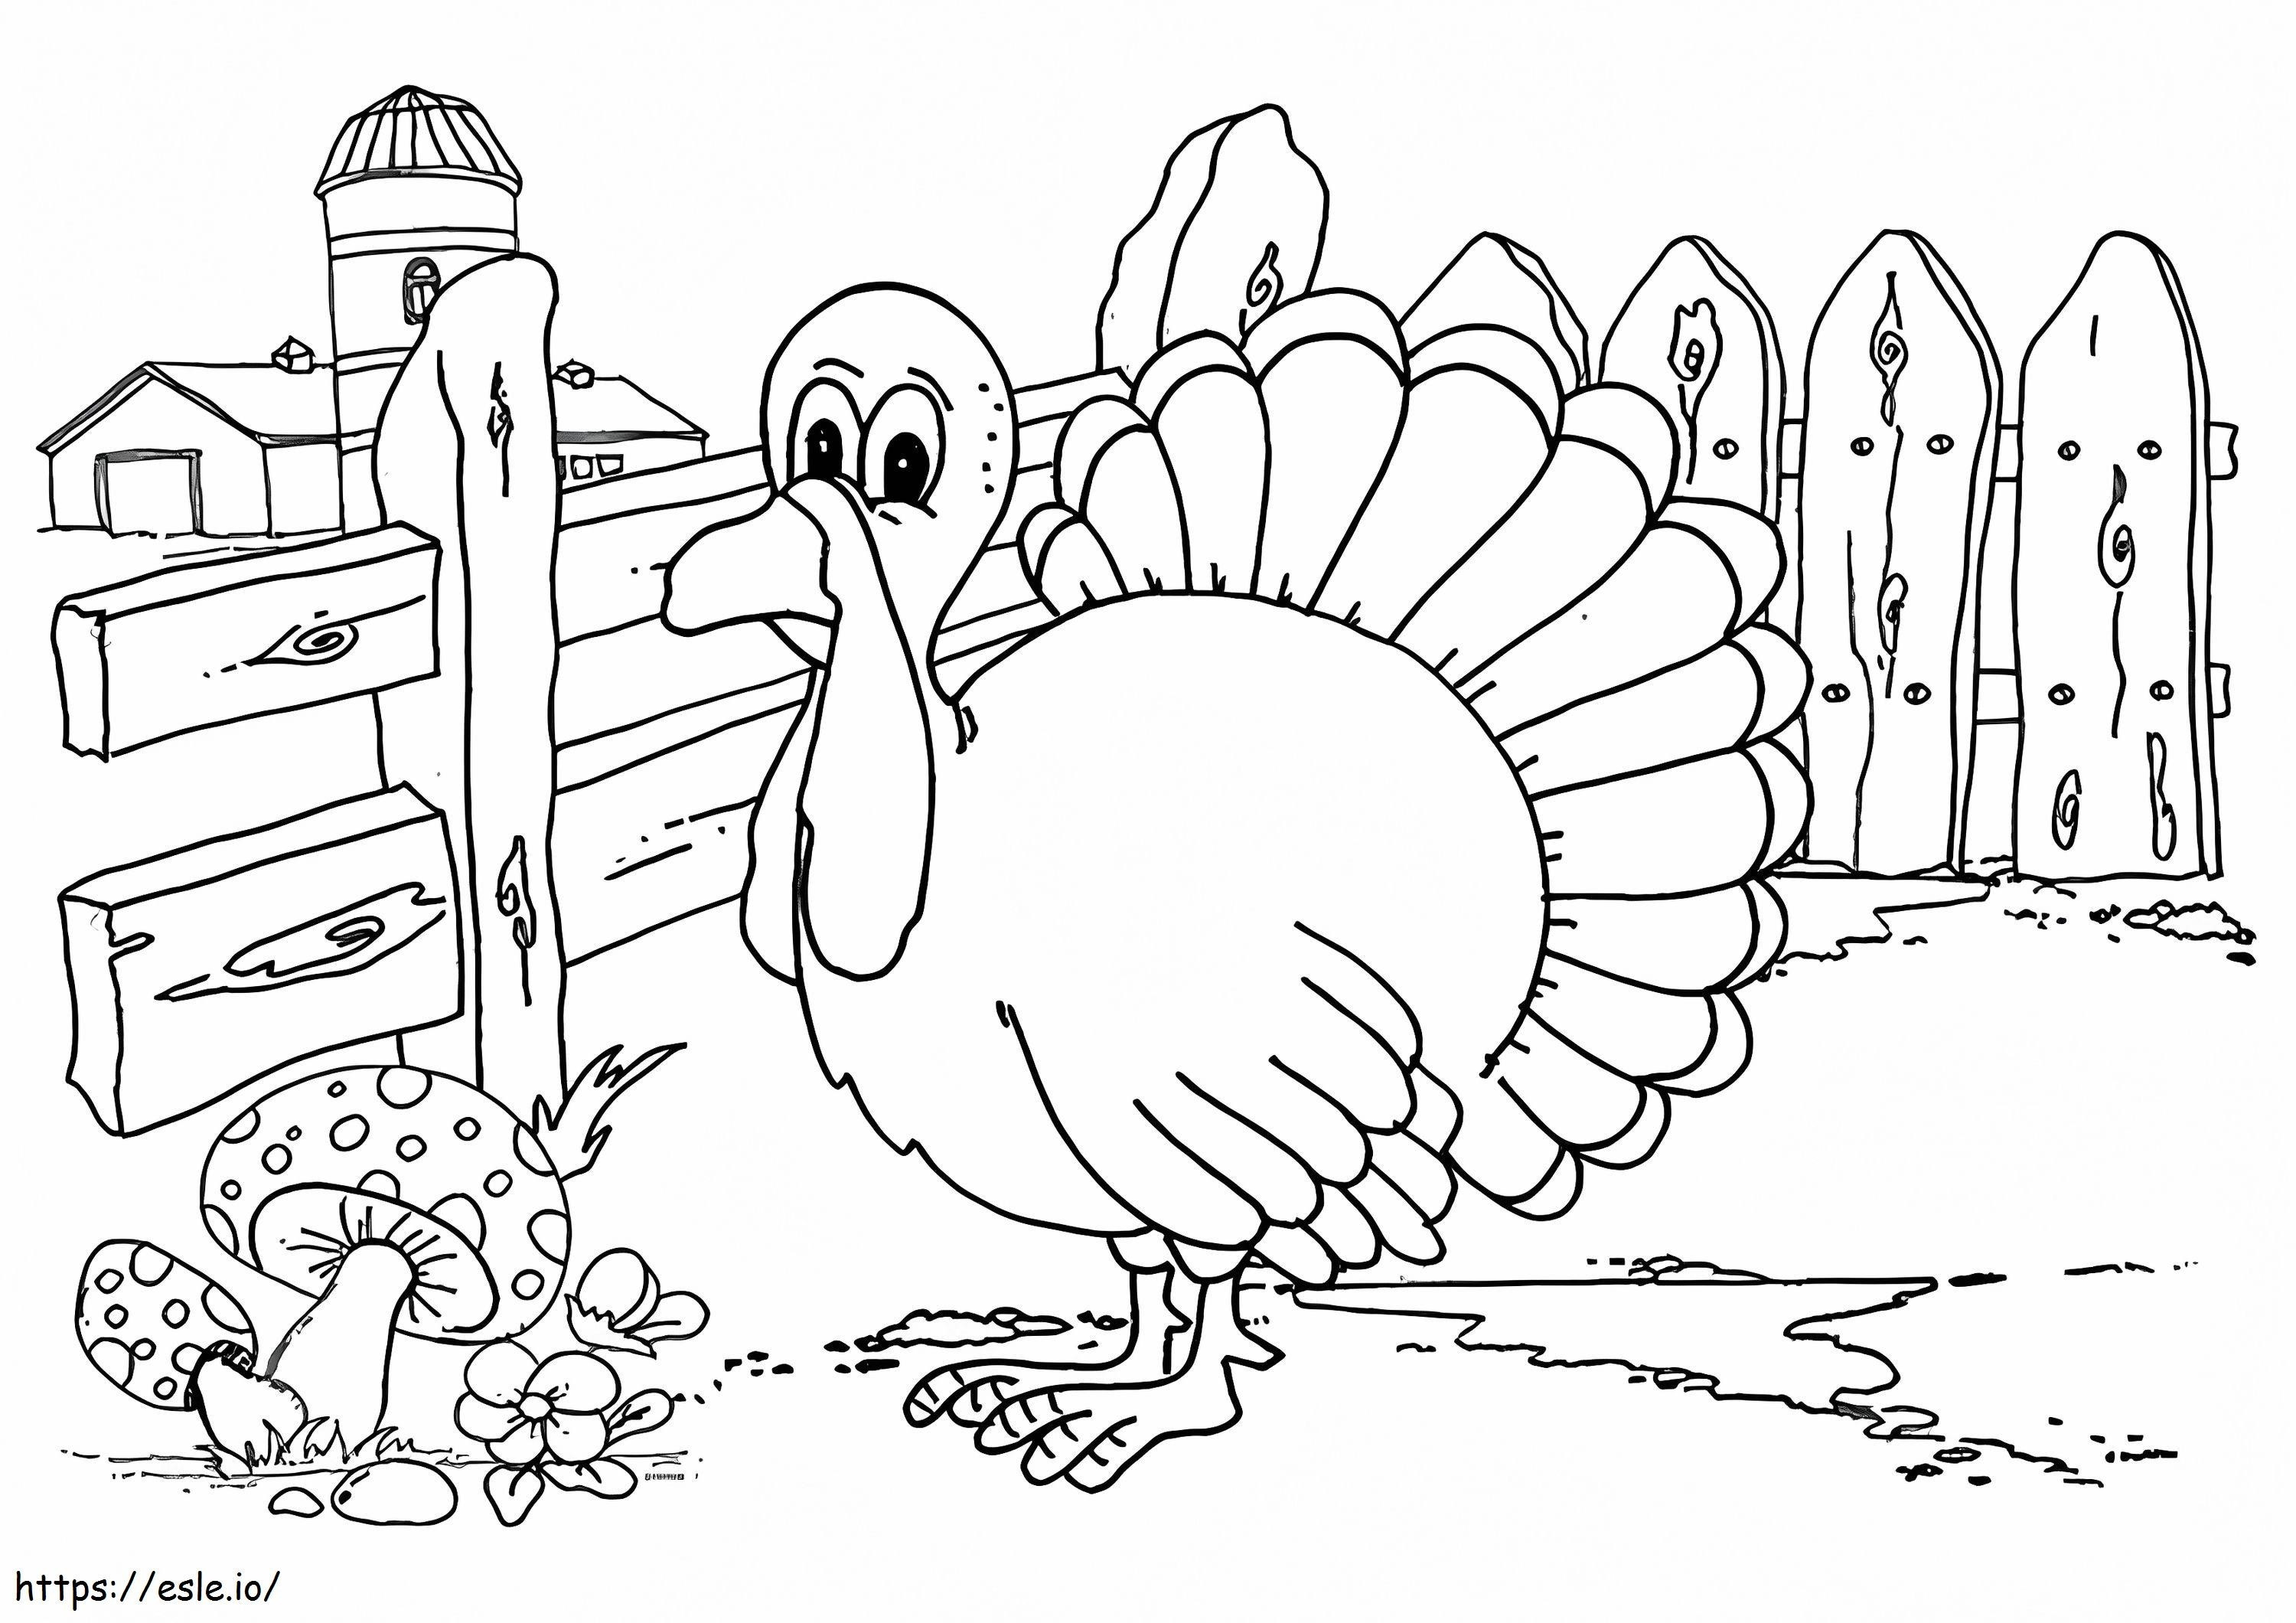 The Turkey At Its Farm A4 coloring page